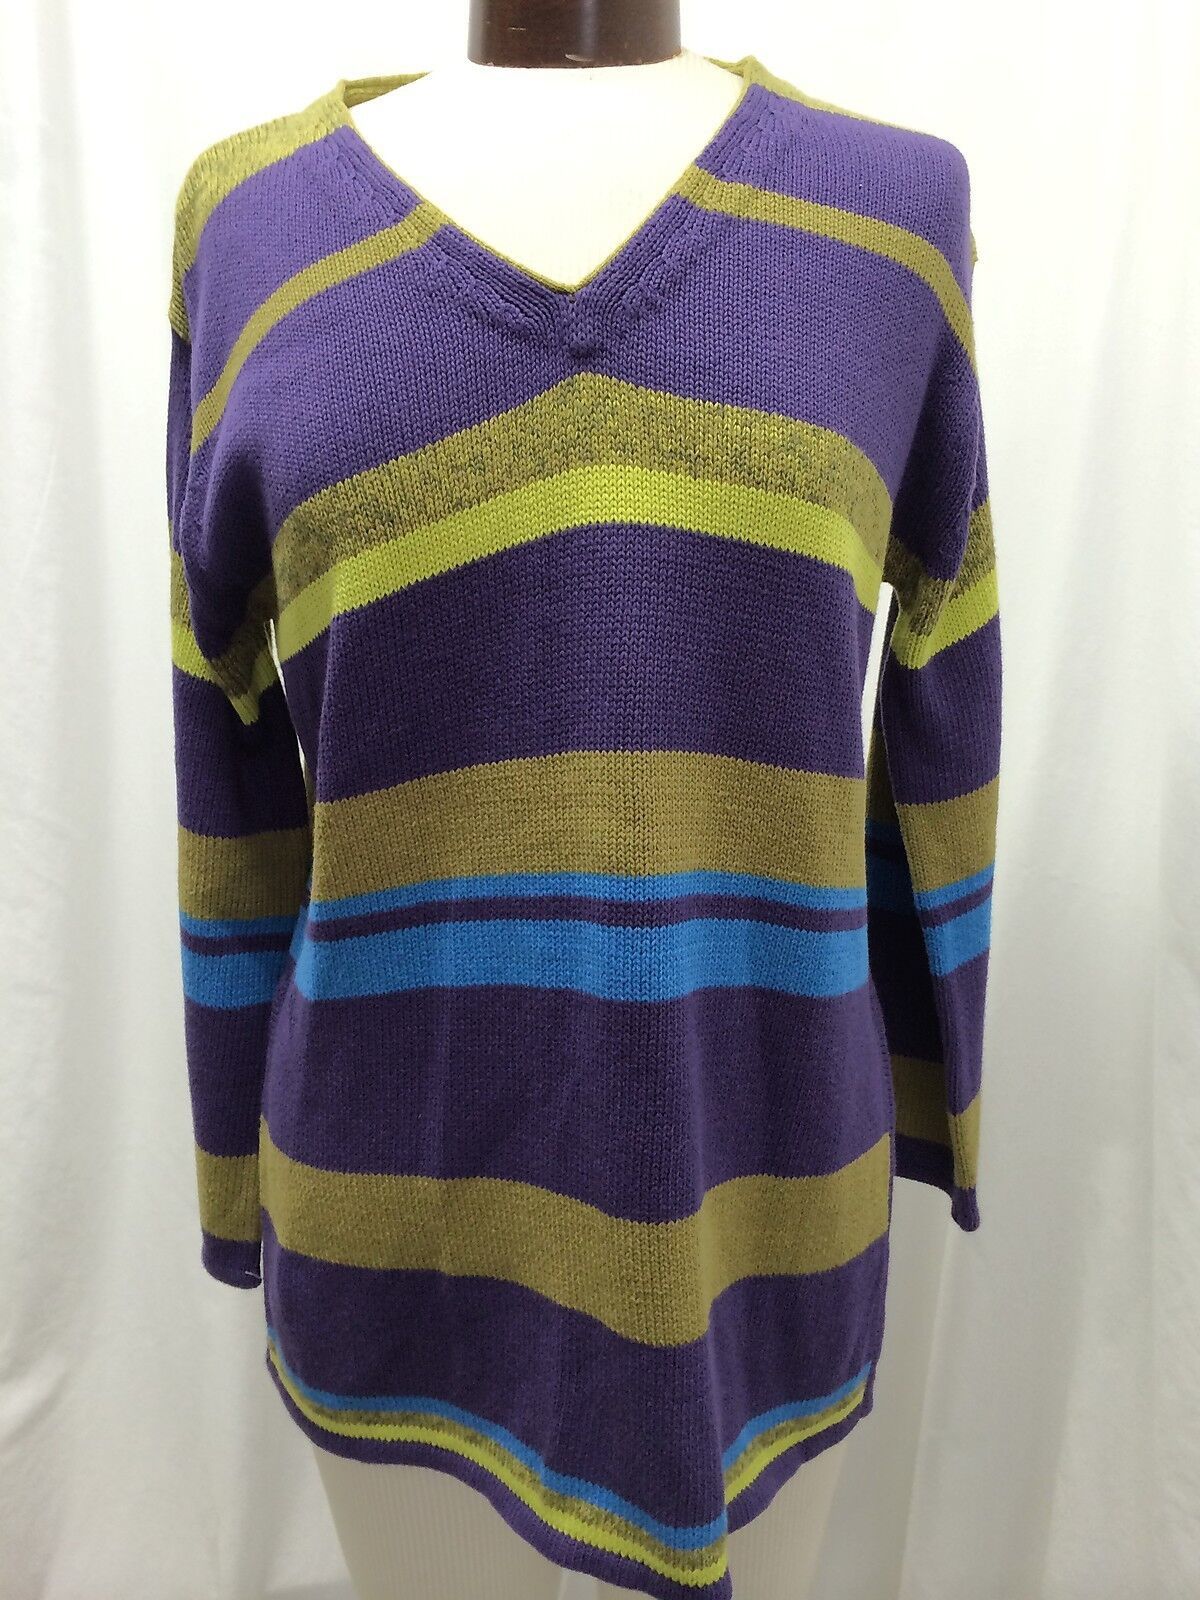 Primary image for Bloomingdales Women's Sweater Purple Green Teal Knit Sweater Size P NWOT